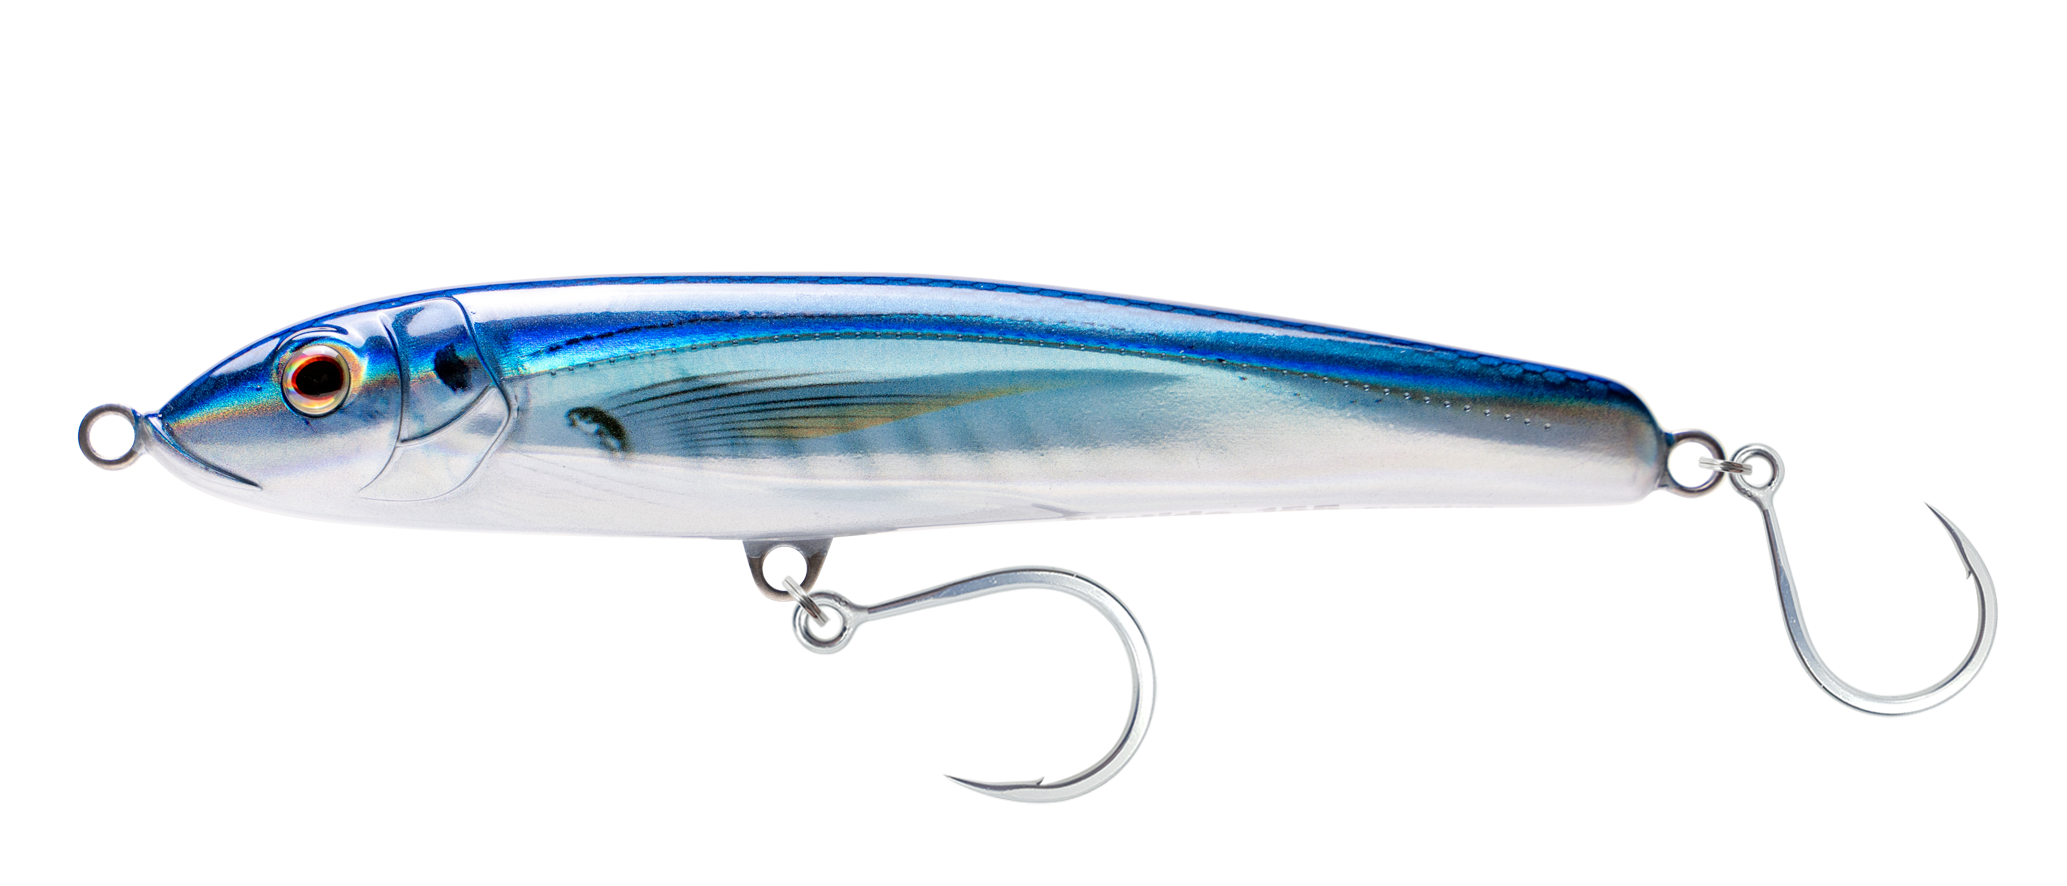 Buster Bait Tackleversatile Fishing Lure Kit - Crankbait, Minnow, Hard  Baits For All Waters